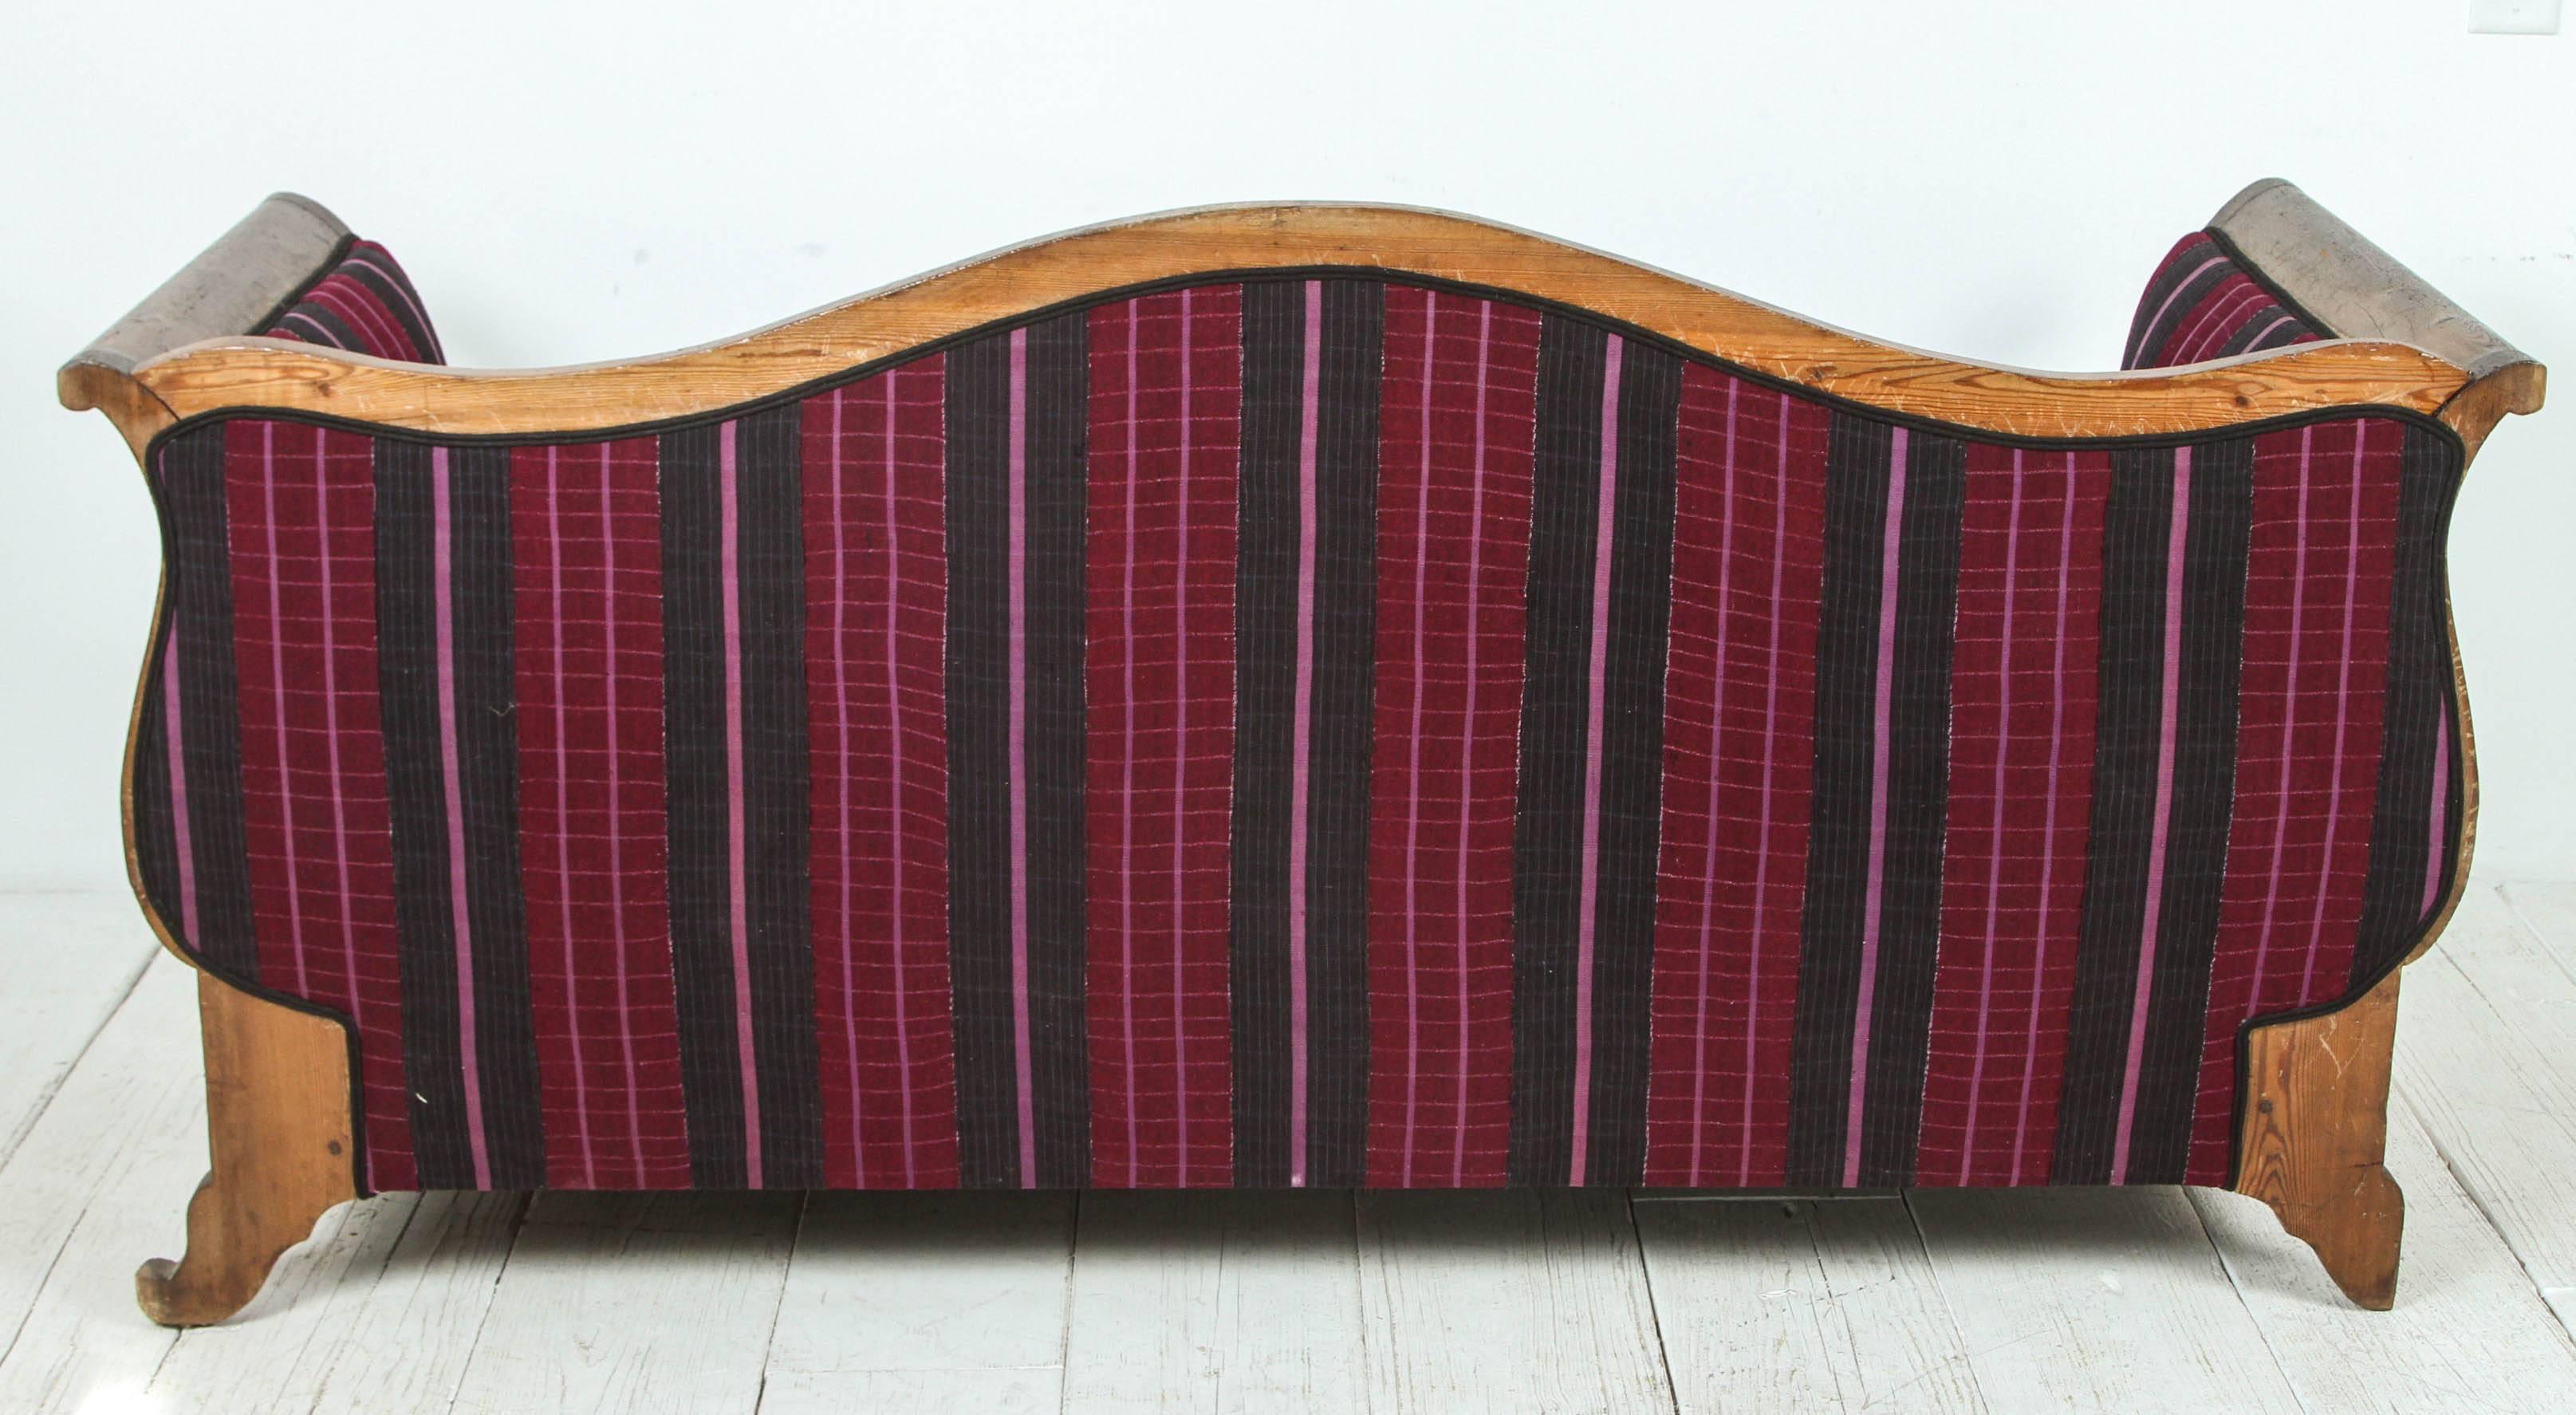 Upholstered curved settee with pink and black stripe fabric.